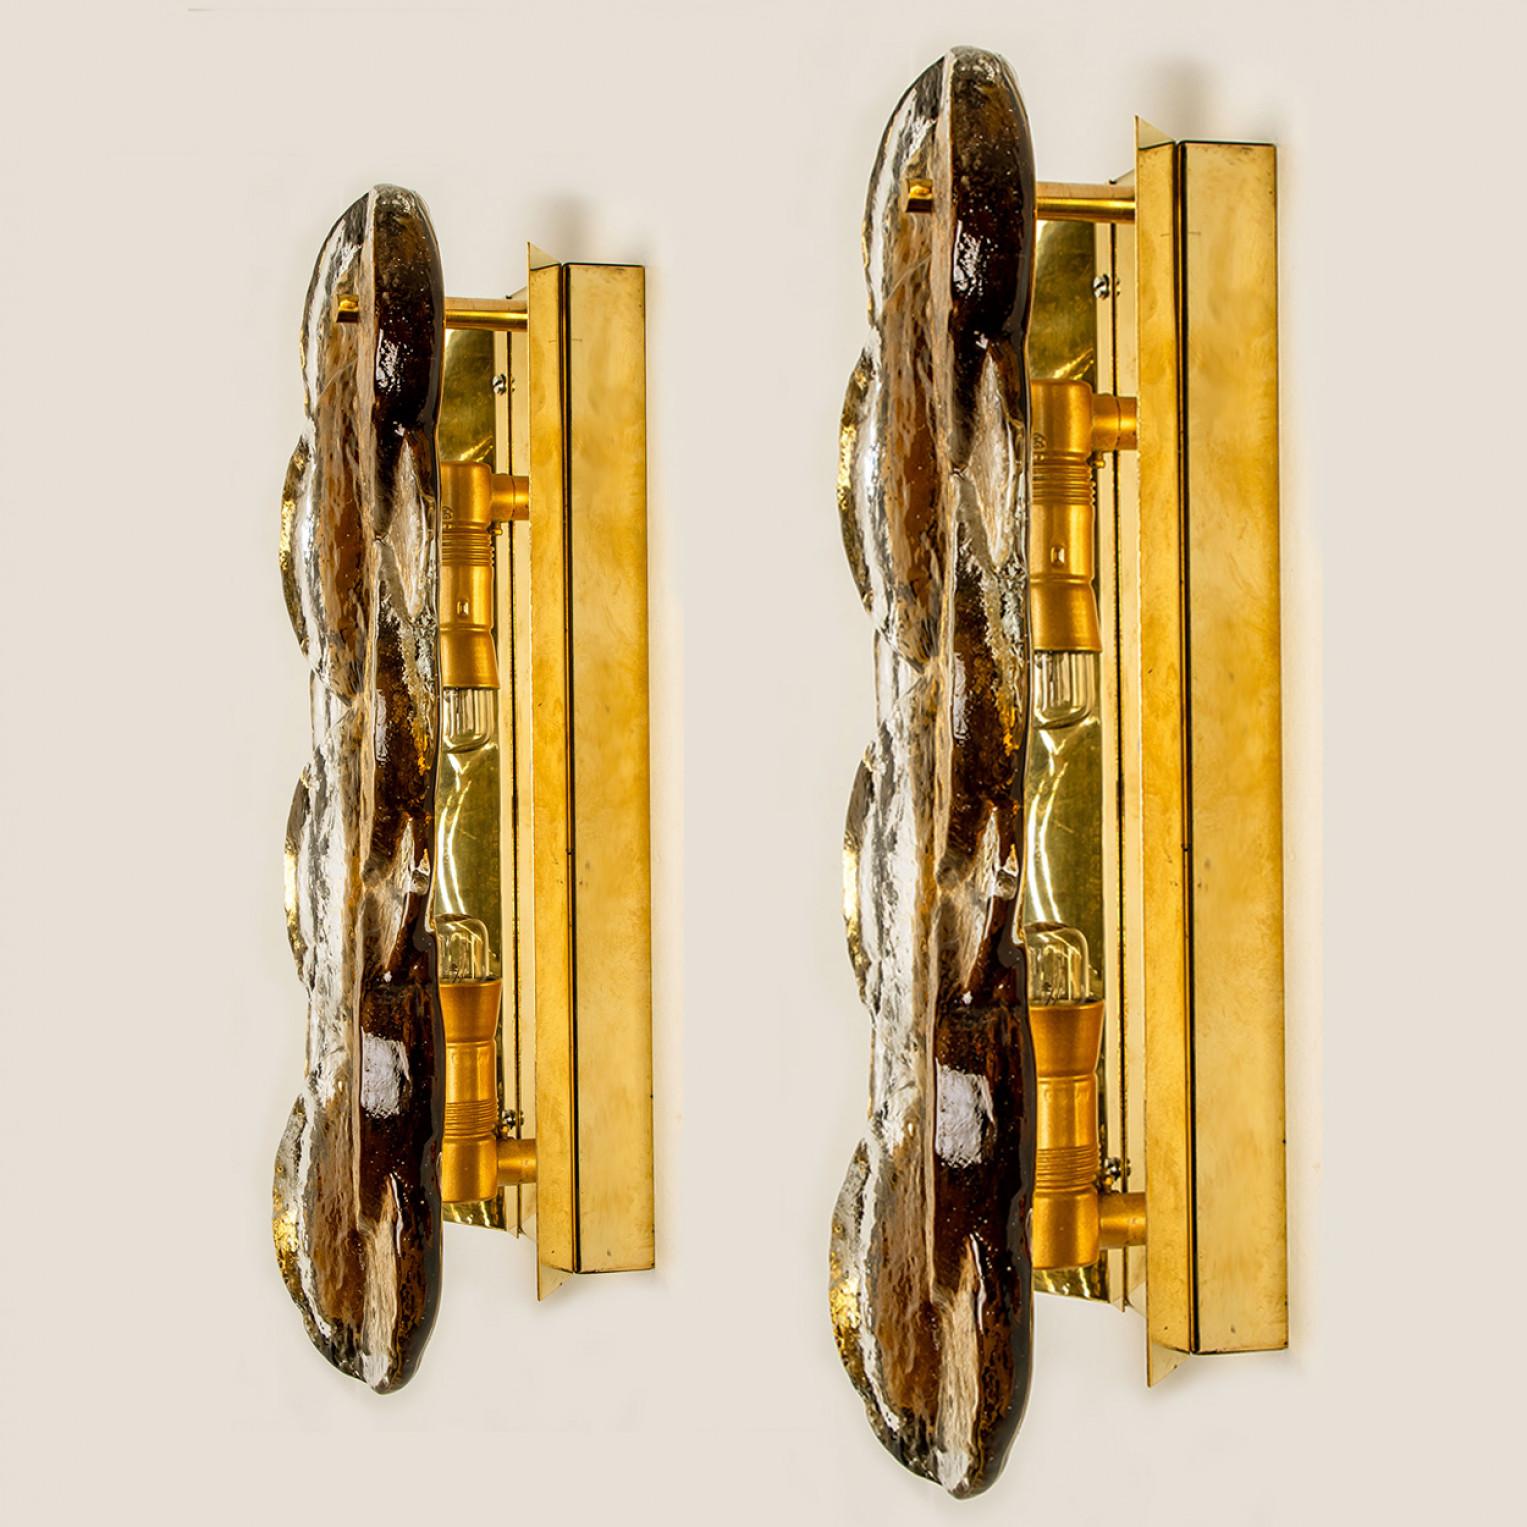 Kalmar swirl sconces wall lights with smoked citrus shaped glass, designed and manufactured in Austria, Europe by J.T. Kalmar/Kalmar Lighting in around 1969. Beautiful, thick textured glass is complimented by brass and metal hardware. Simple and